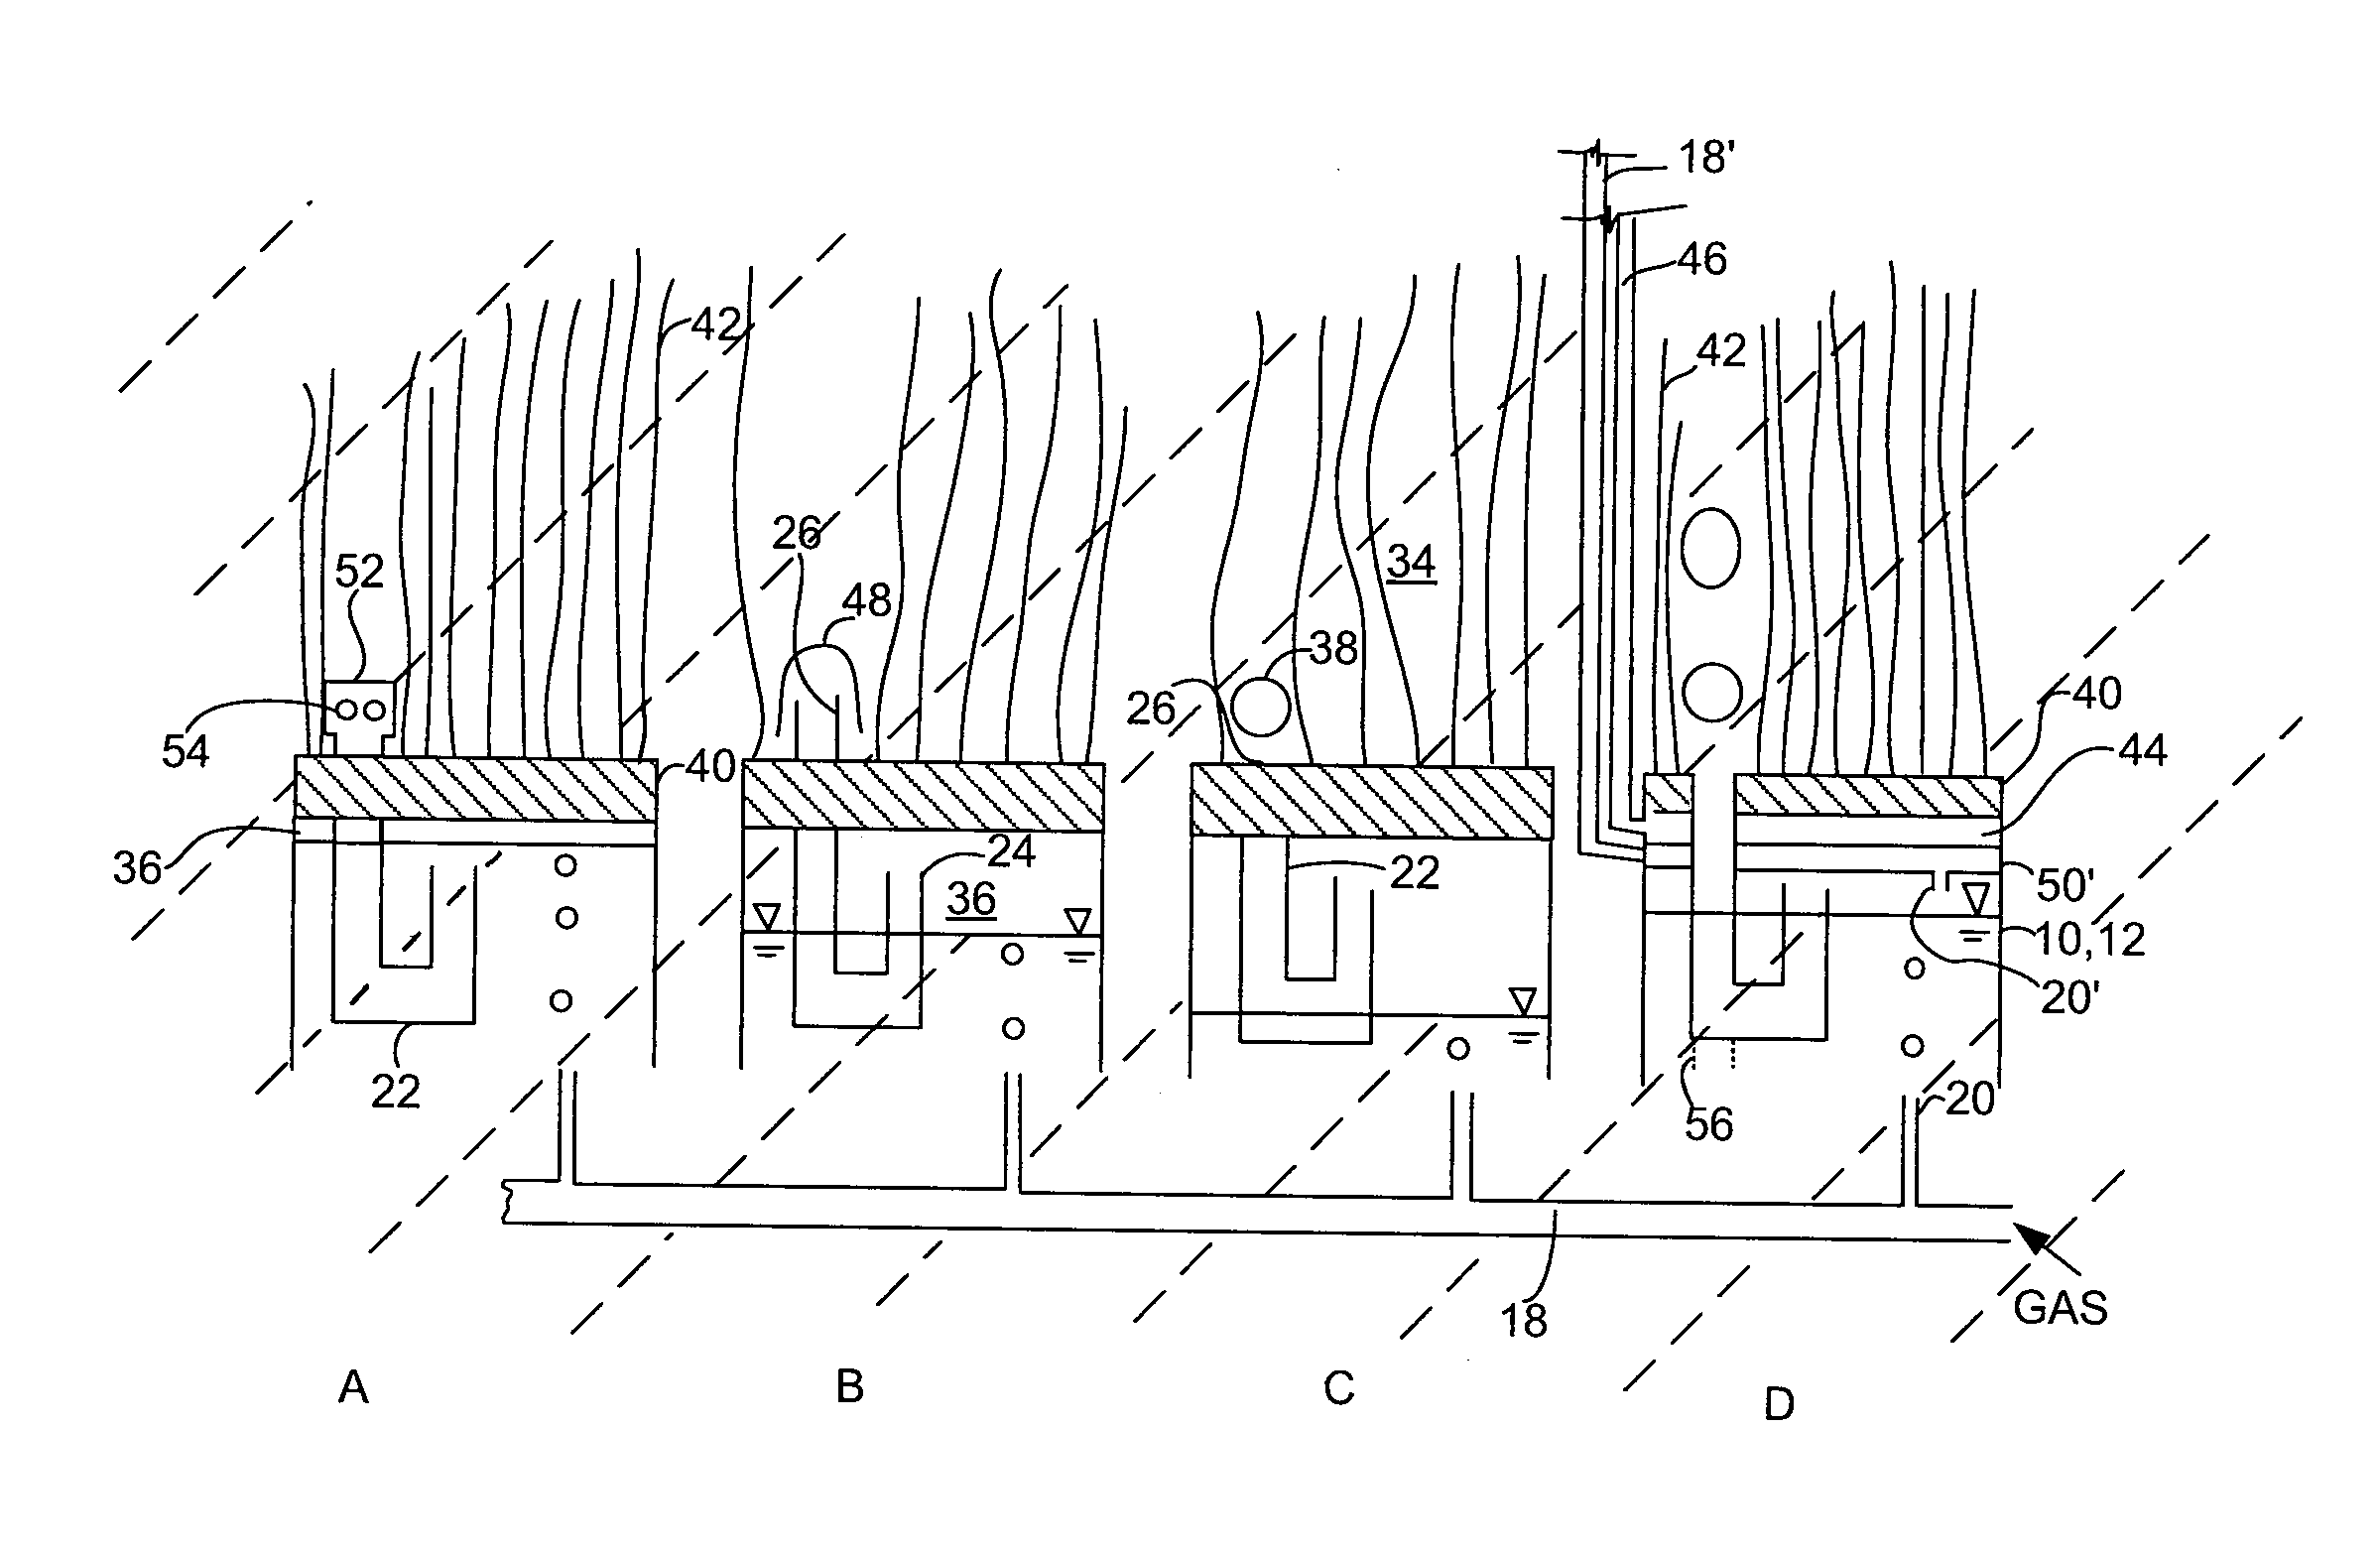 Integrated gas sparger for an immersed membrane